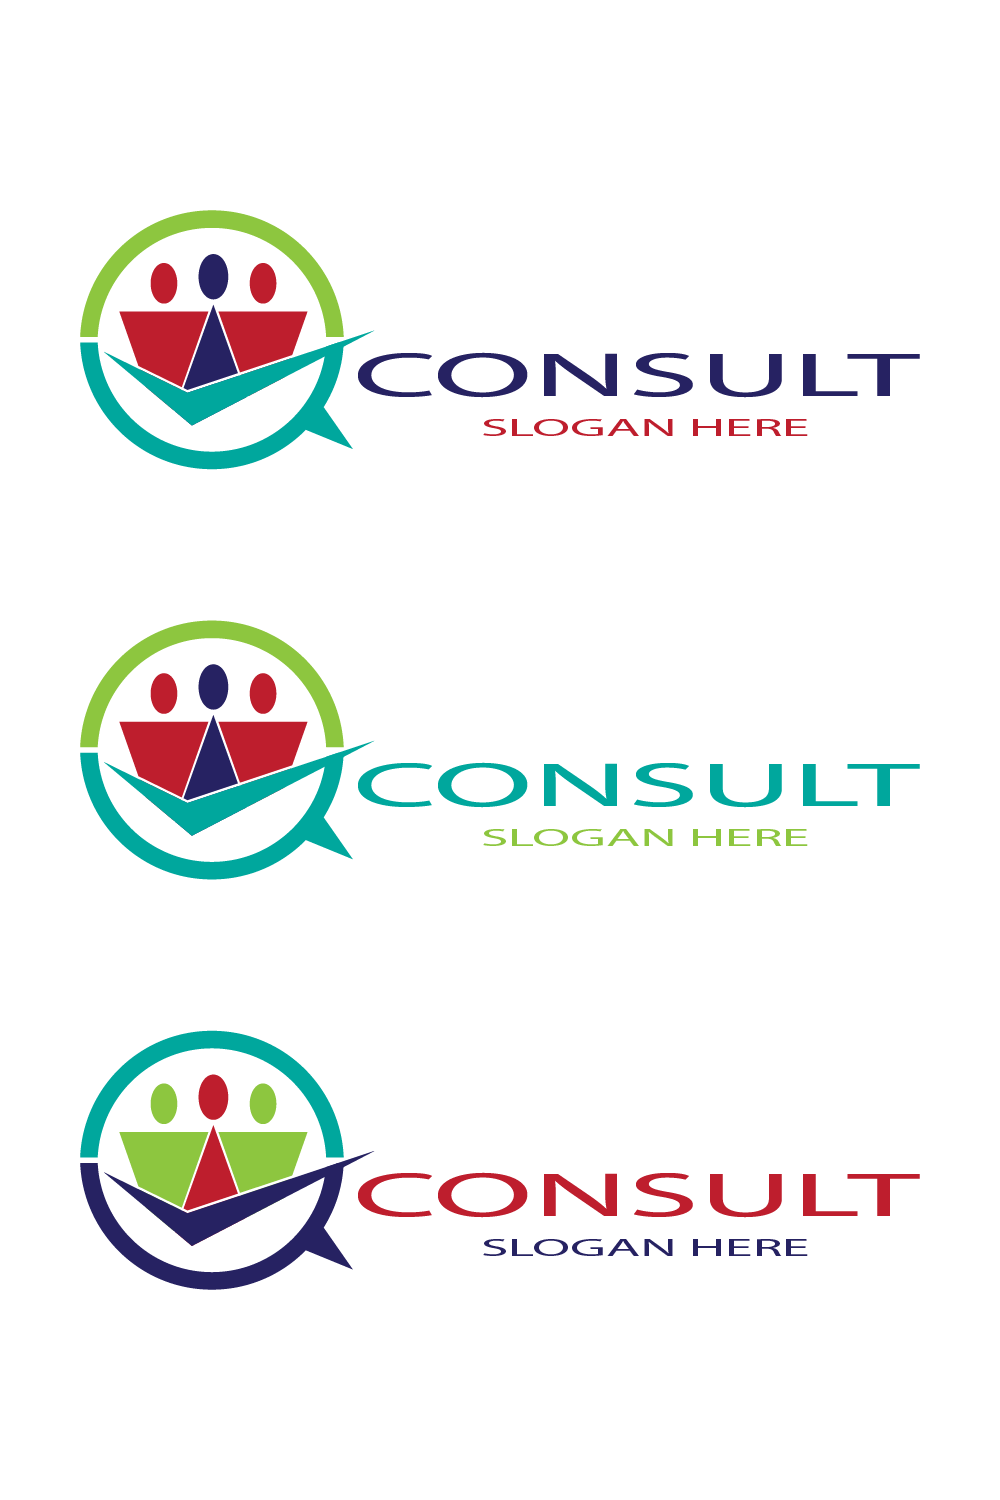 Consulting Logo - pinterest image preview.